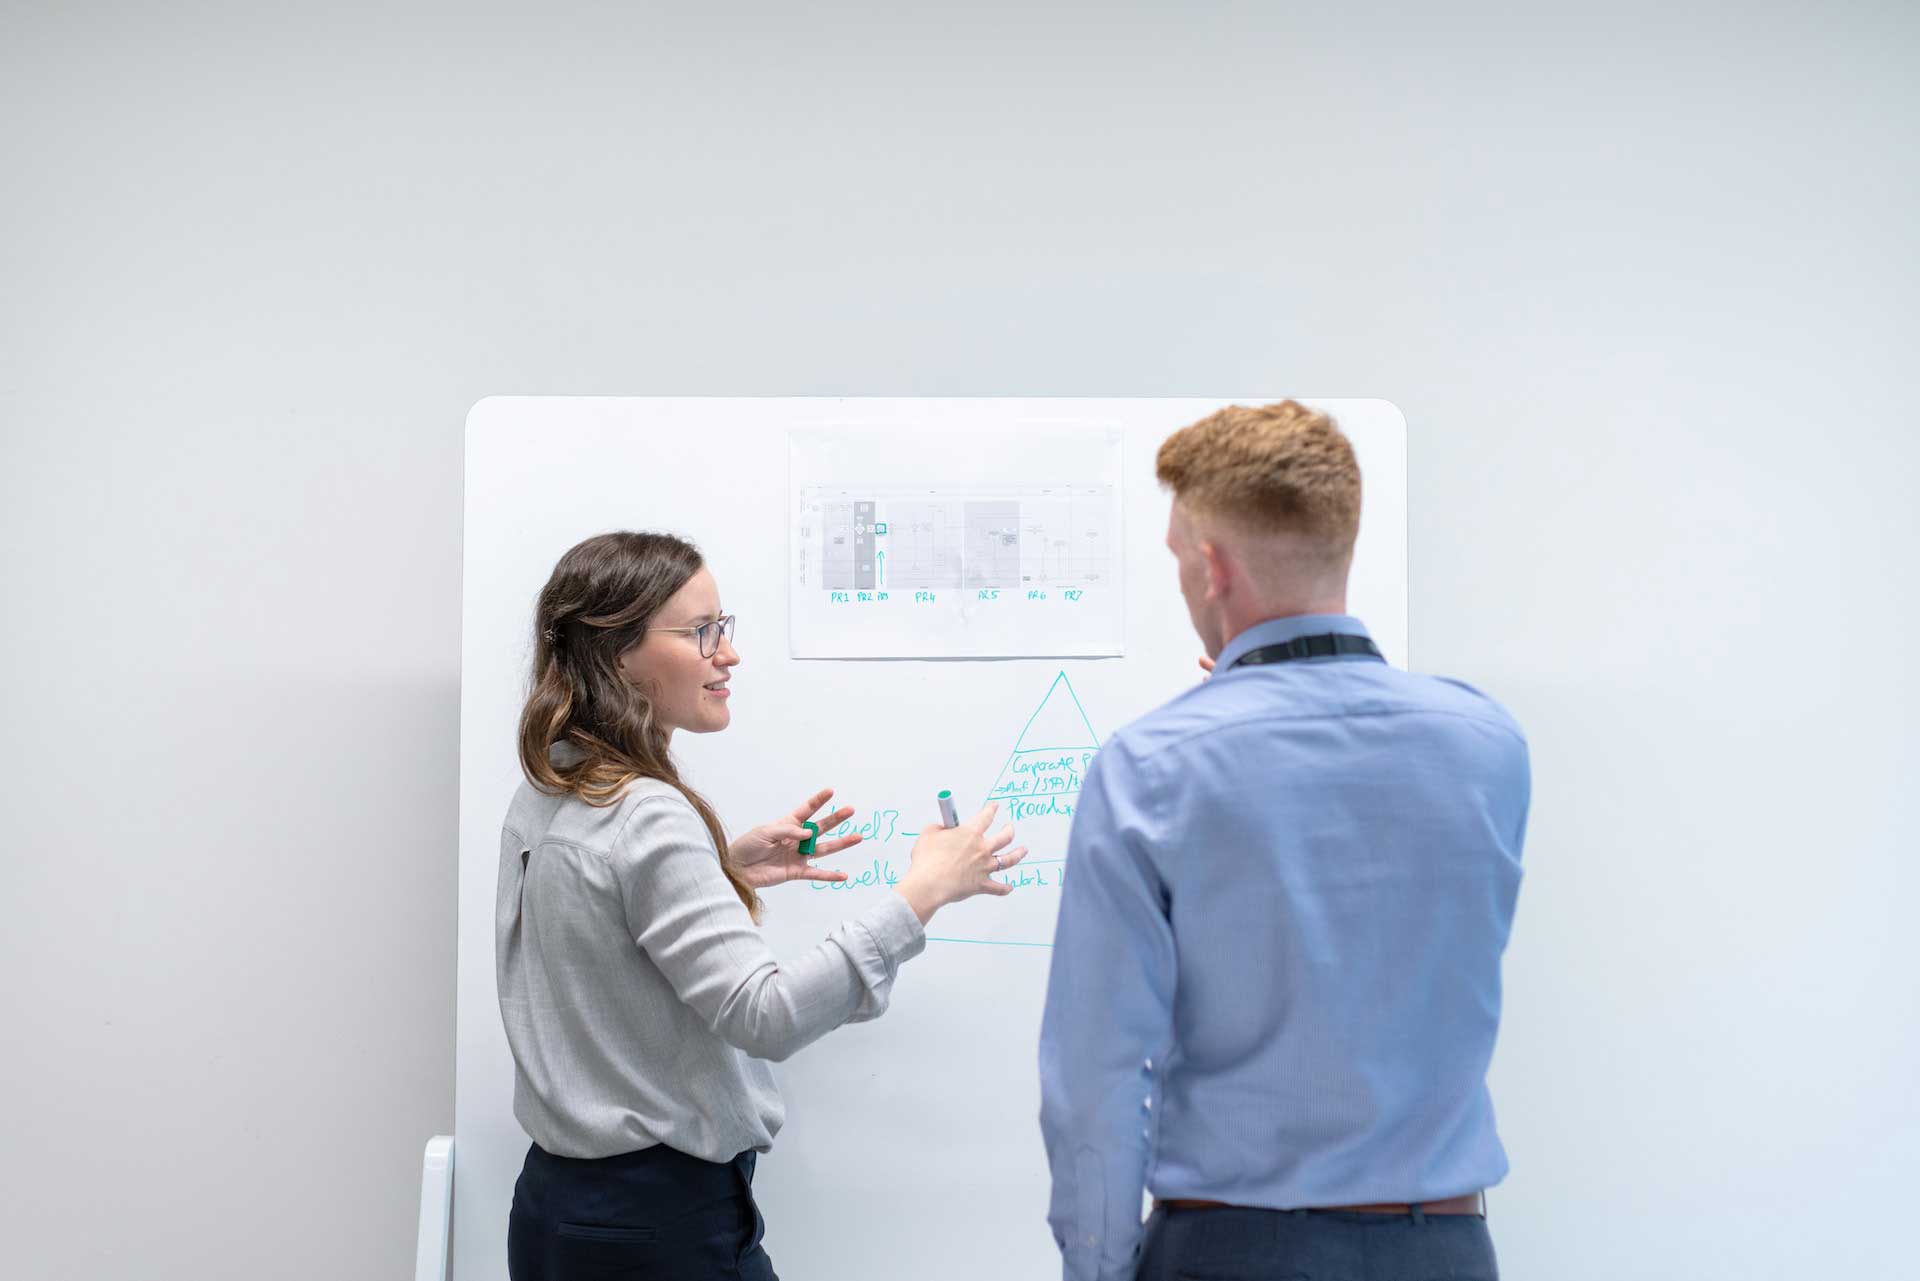 One young professional at a whiteboard explaining a digital product development process to her colleague